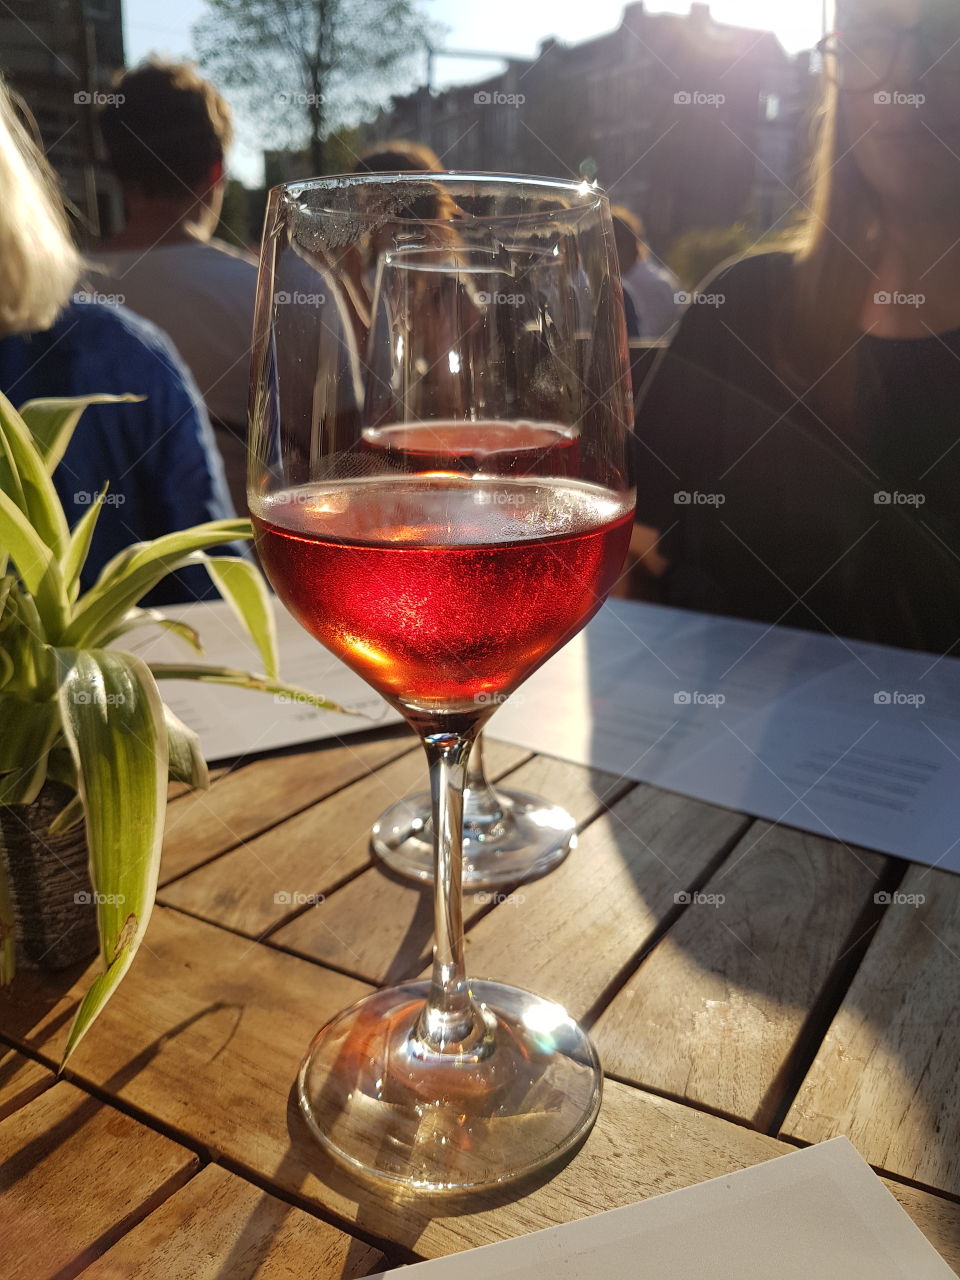 A glass of Rosé in the evening light, Amsterdam.